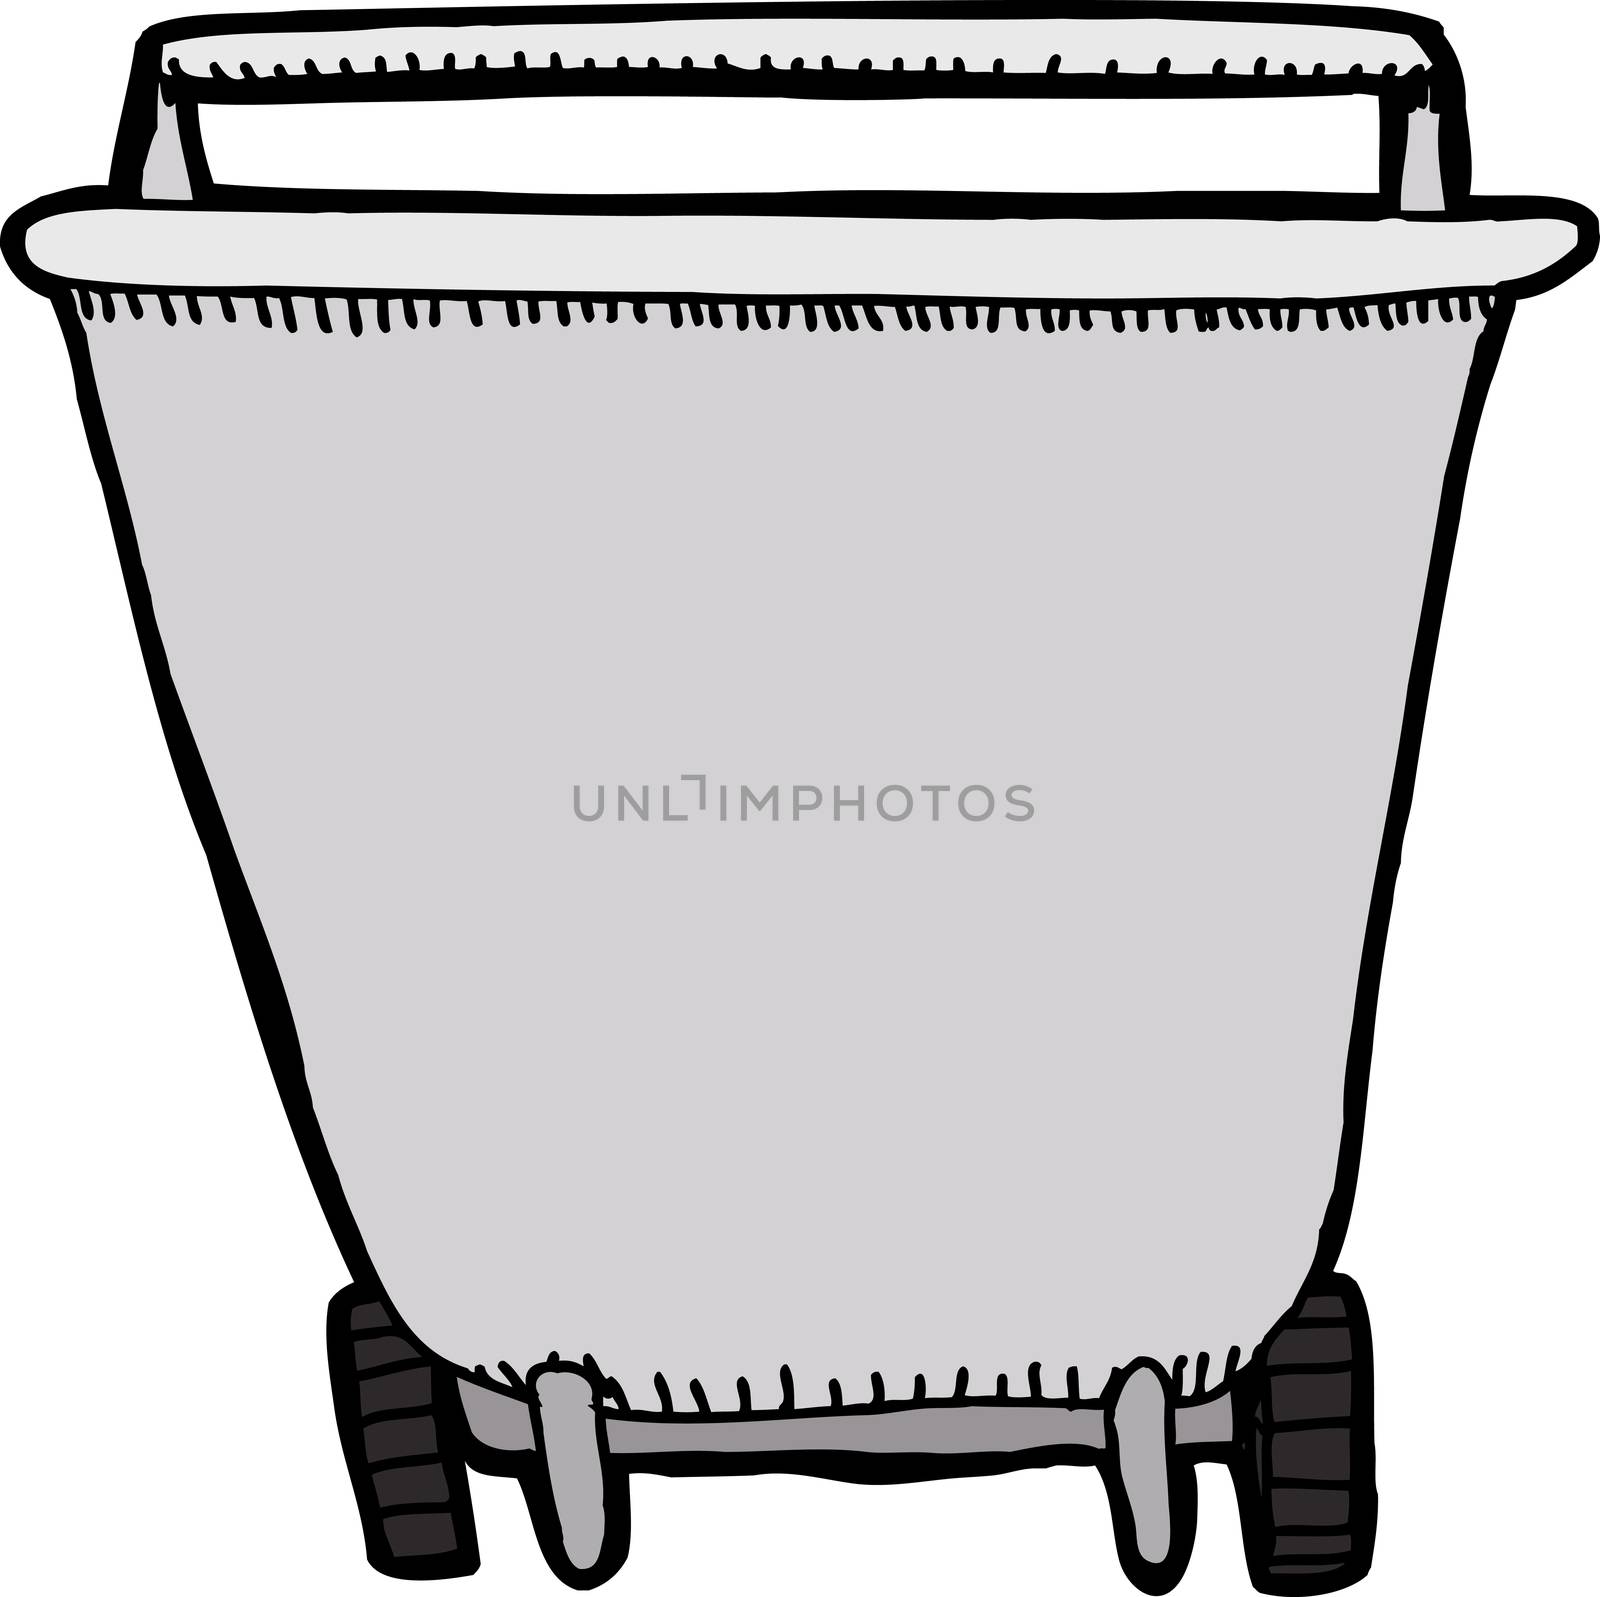 Front view of wheel barrel on isolated background